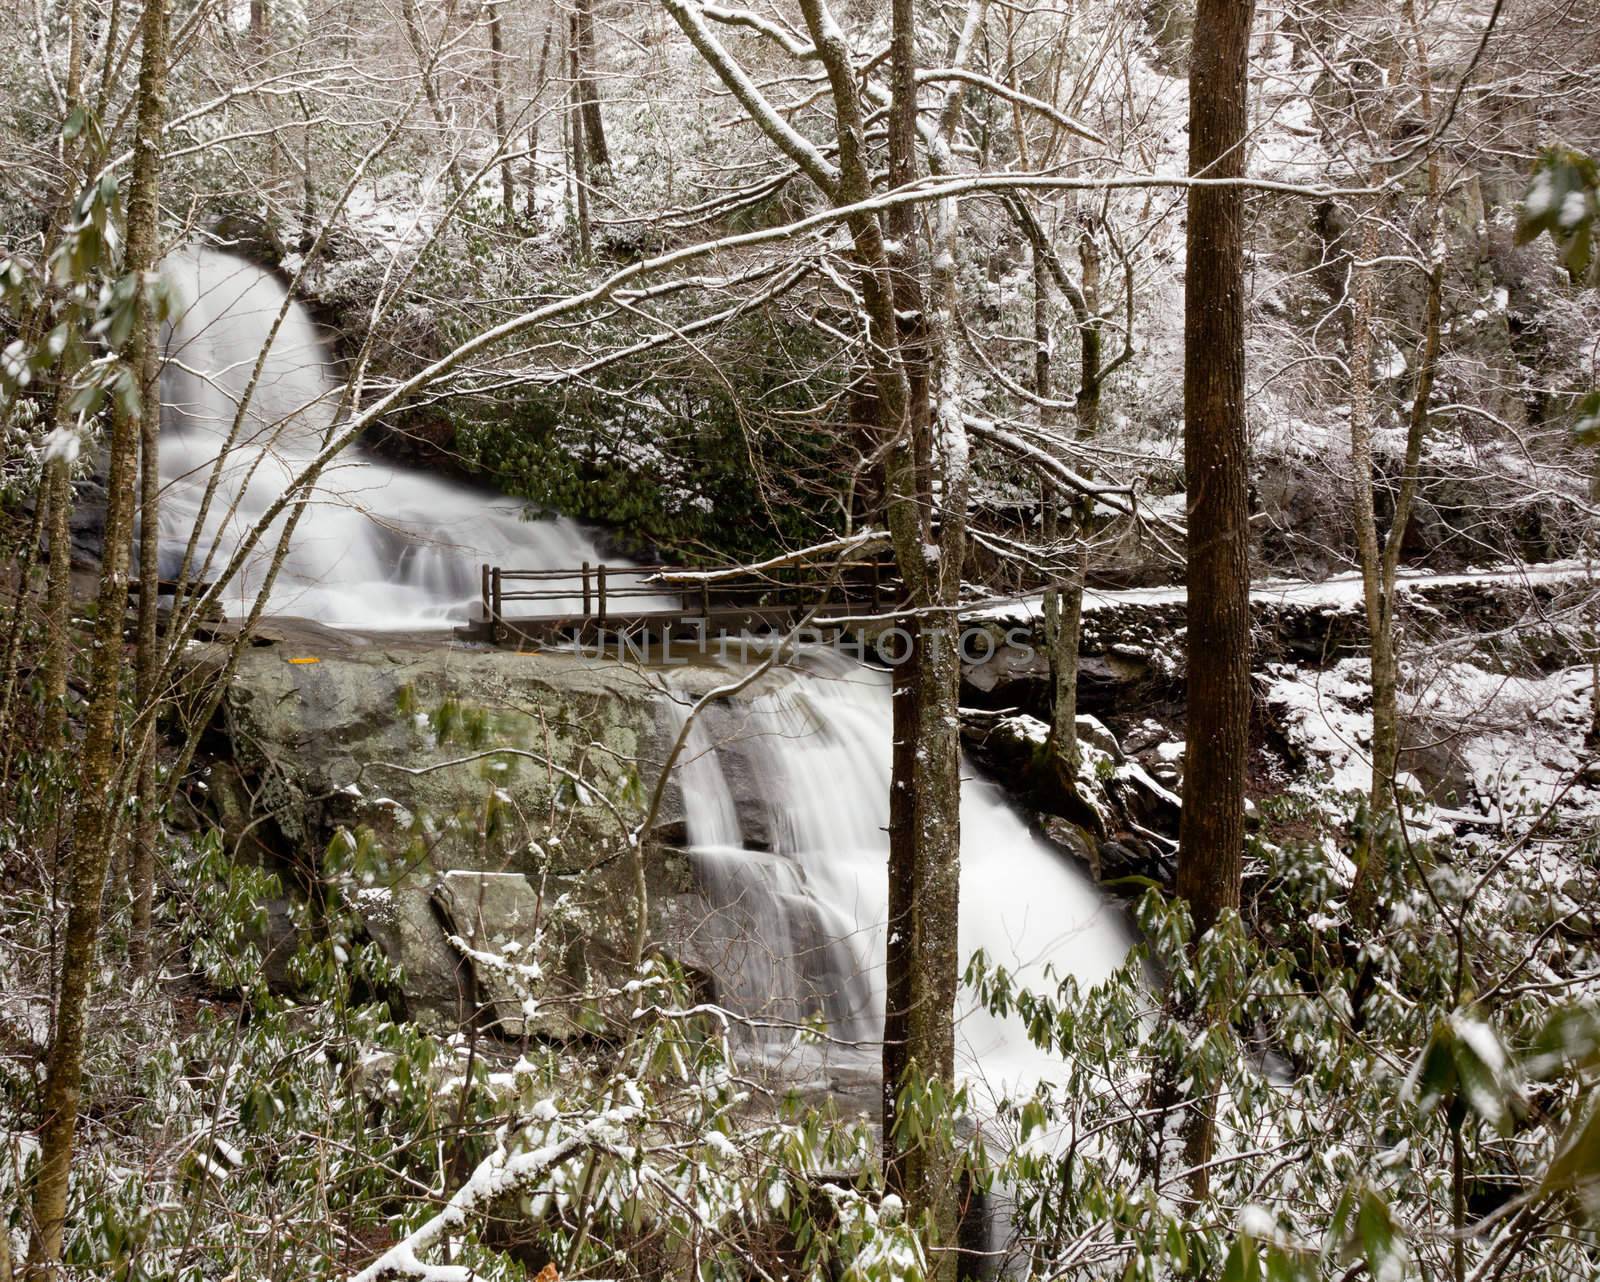 Snow covers the leaves and mountain as Laurel falls cascades over the mountain